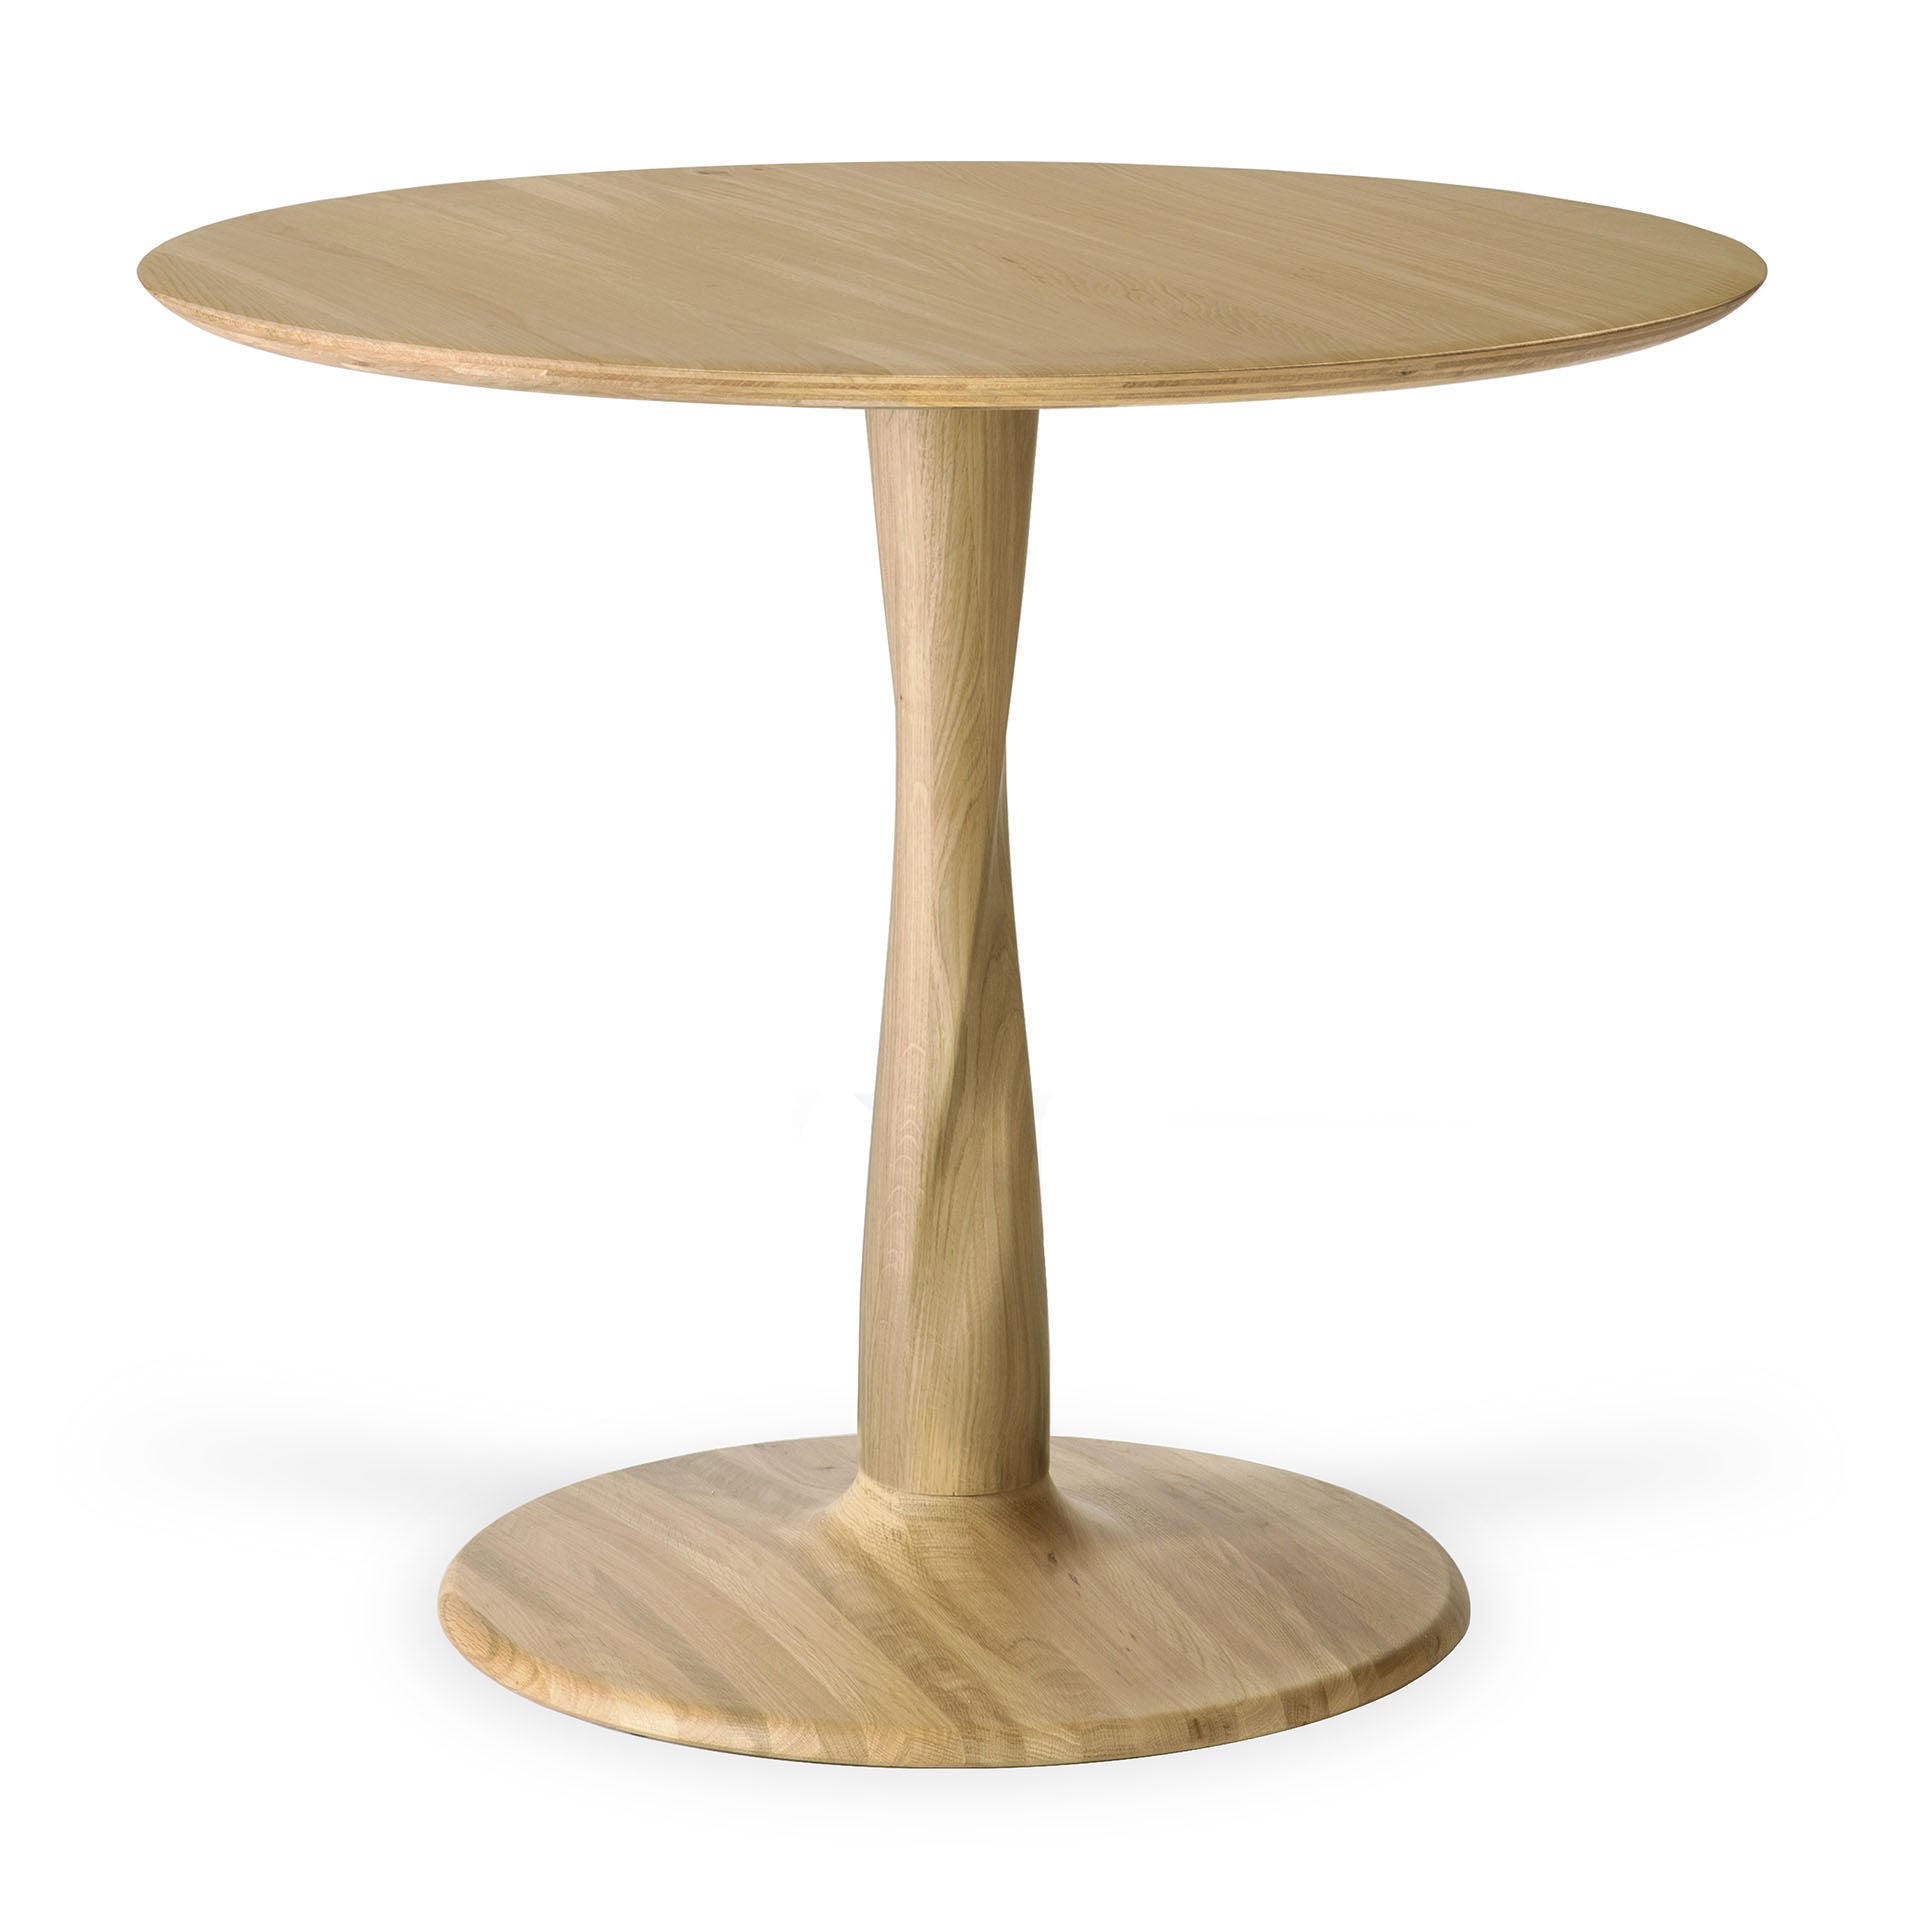 Ethnicraft Torsion Oak Round Dining Table